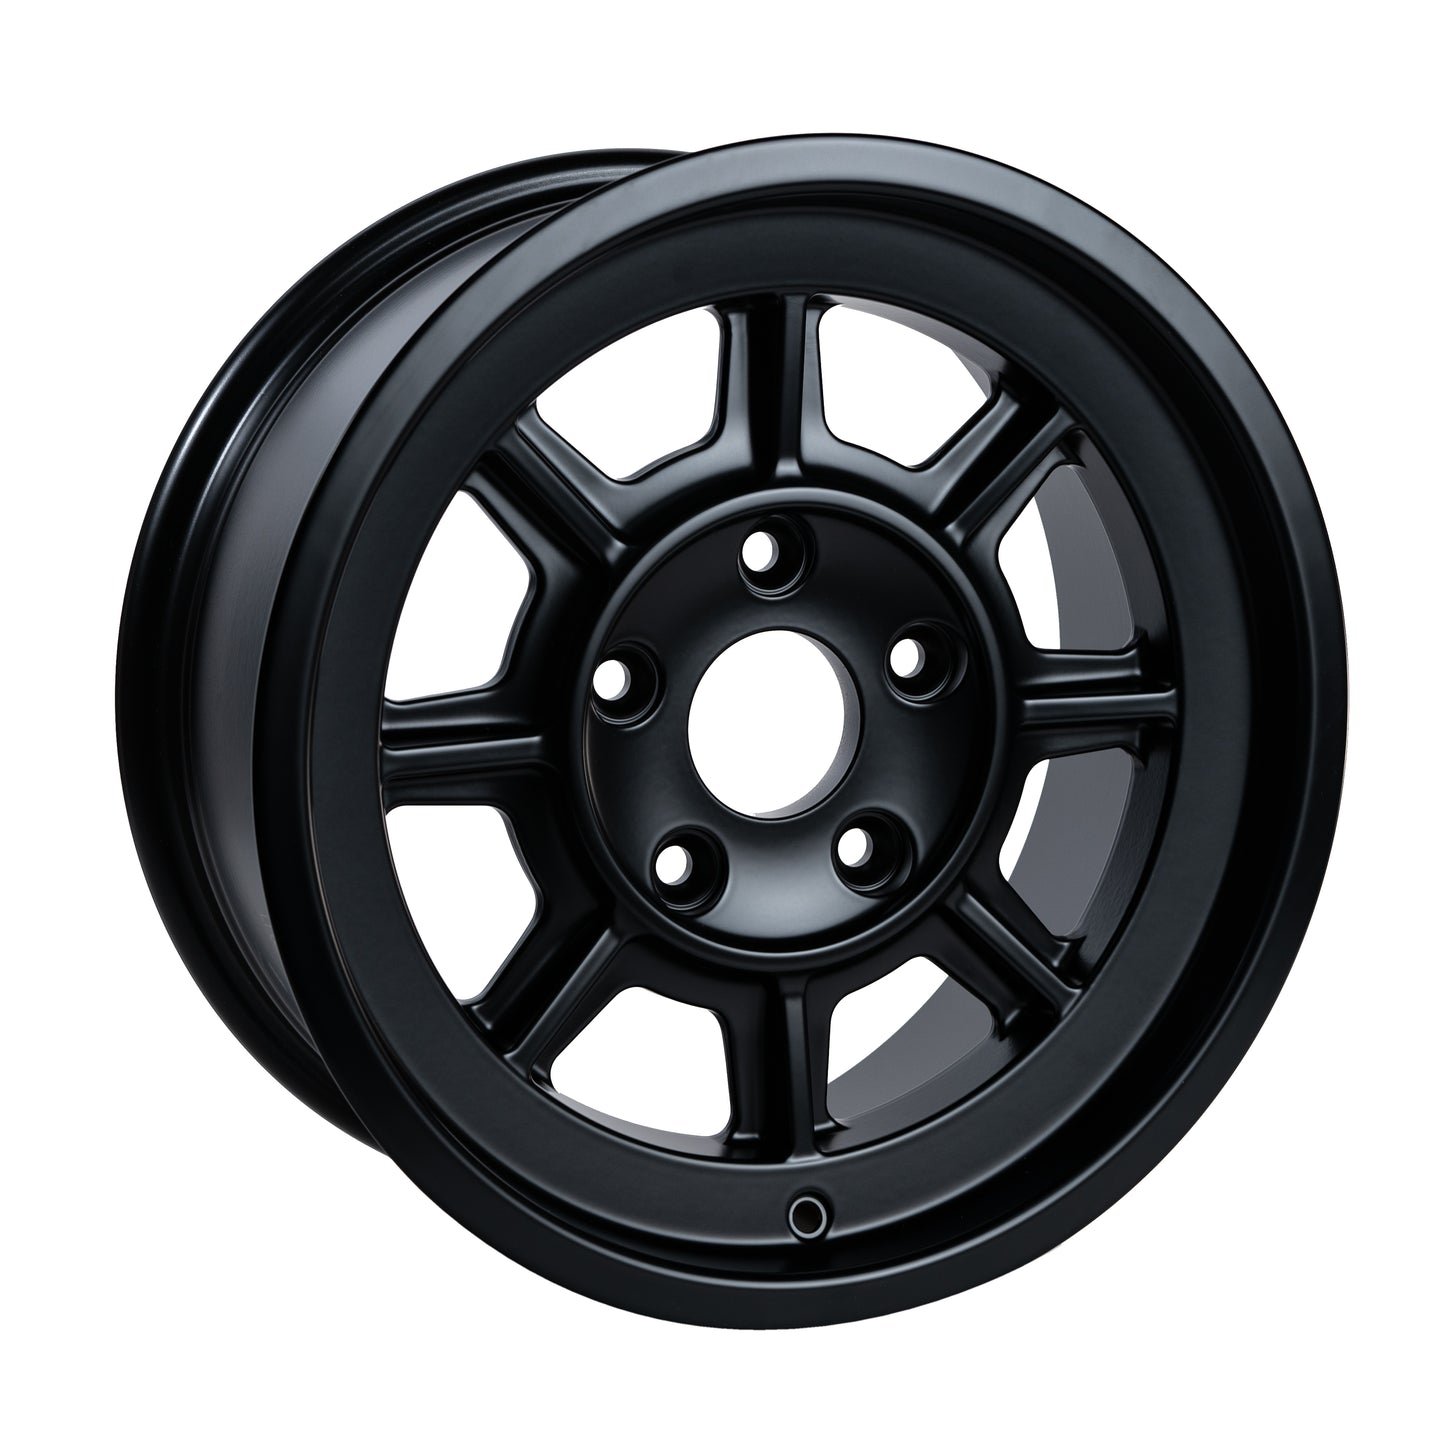 PAG1670 Satin Black 16 x 7" Alloy Wheels - Sierra Madre Collection